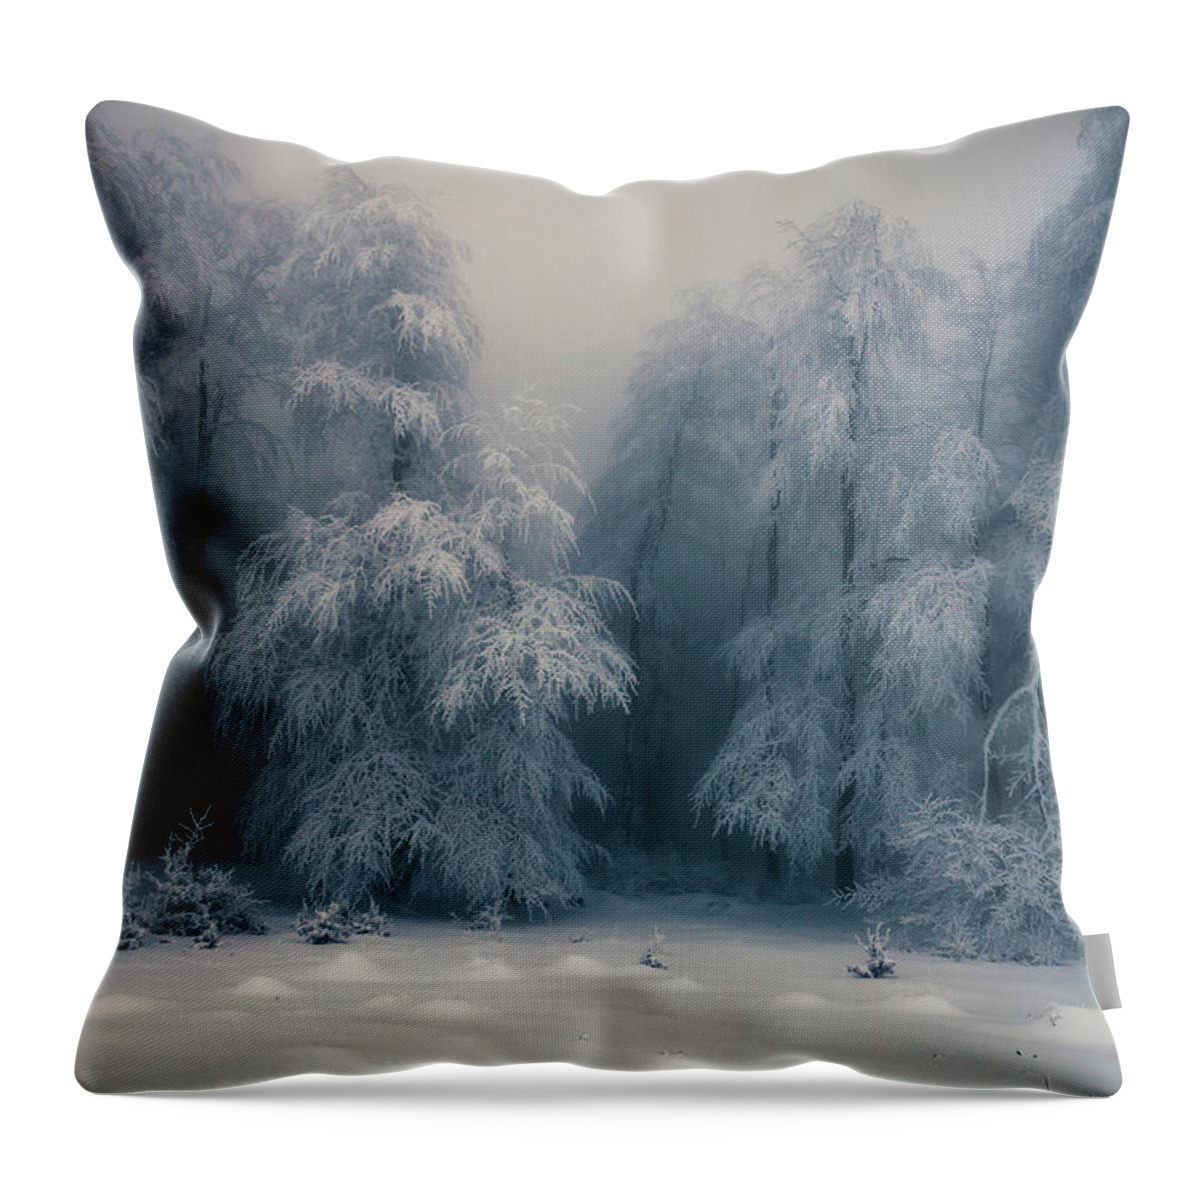 Mountain Throw Pillow featuring the photograph Frozen Forest by Evgeni Dinev